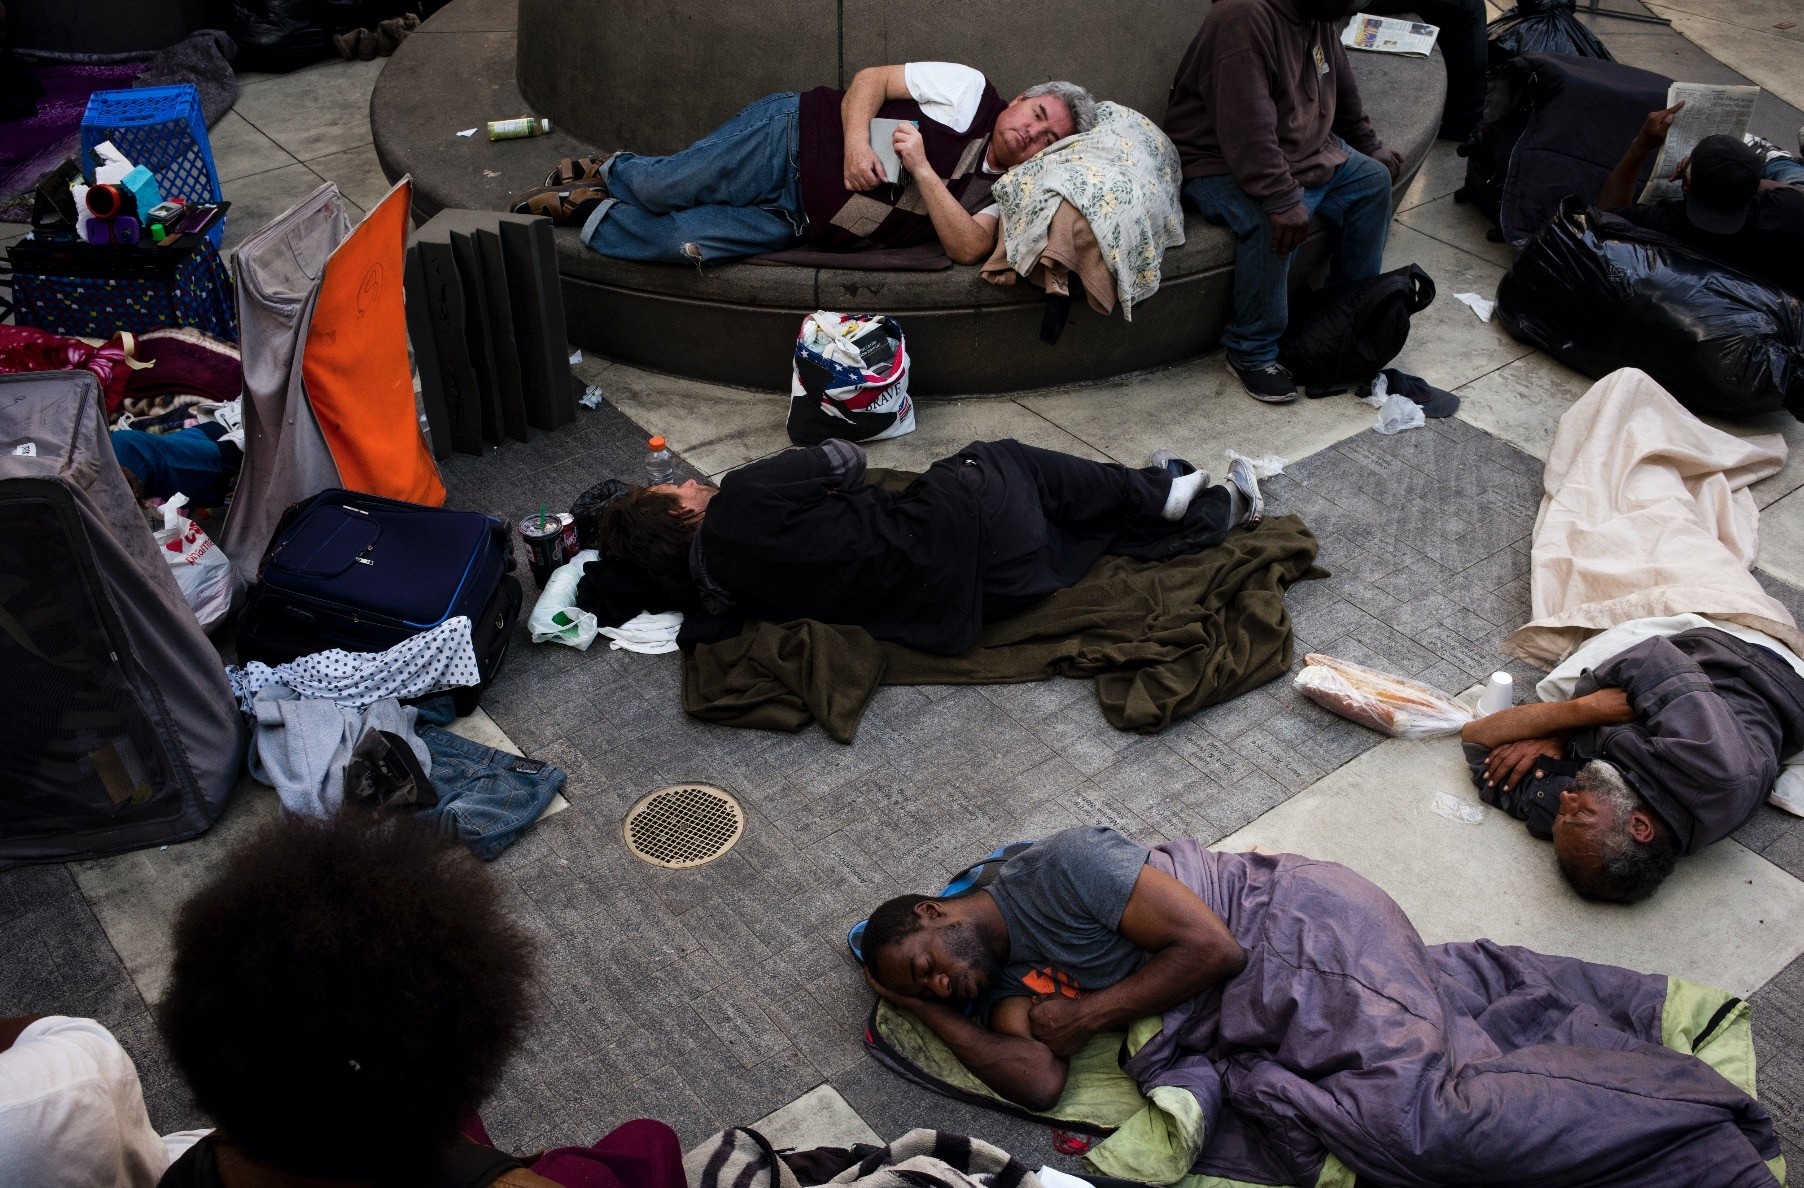 A group of homeless people sleep in the courtyard of the Midnight Mission in Los Angeles. The missionu2019s courtyard is open to all homeless people looking for a safe place to spend the night.